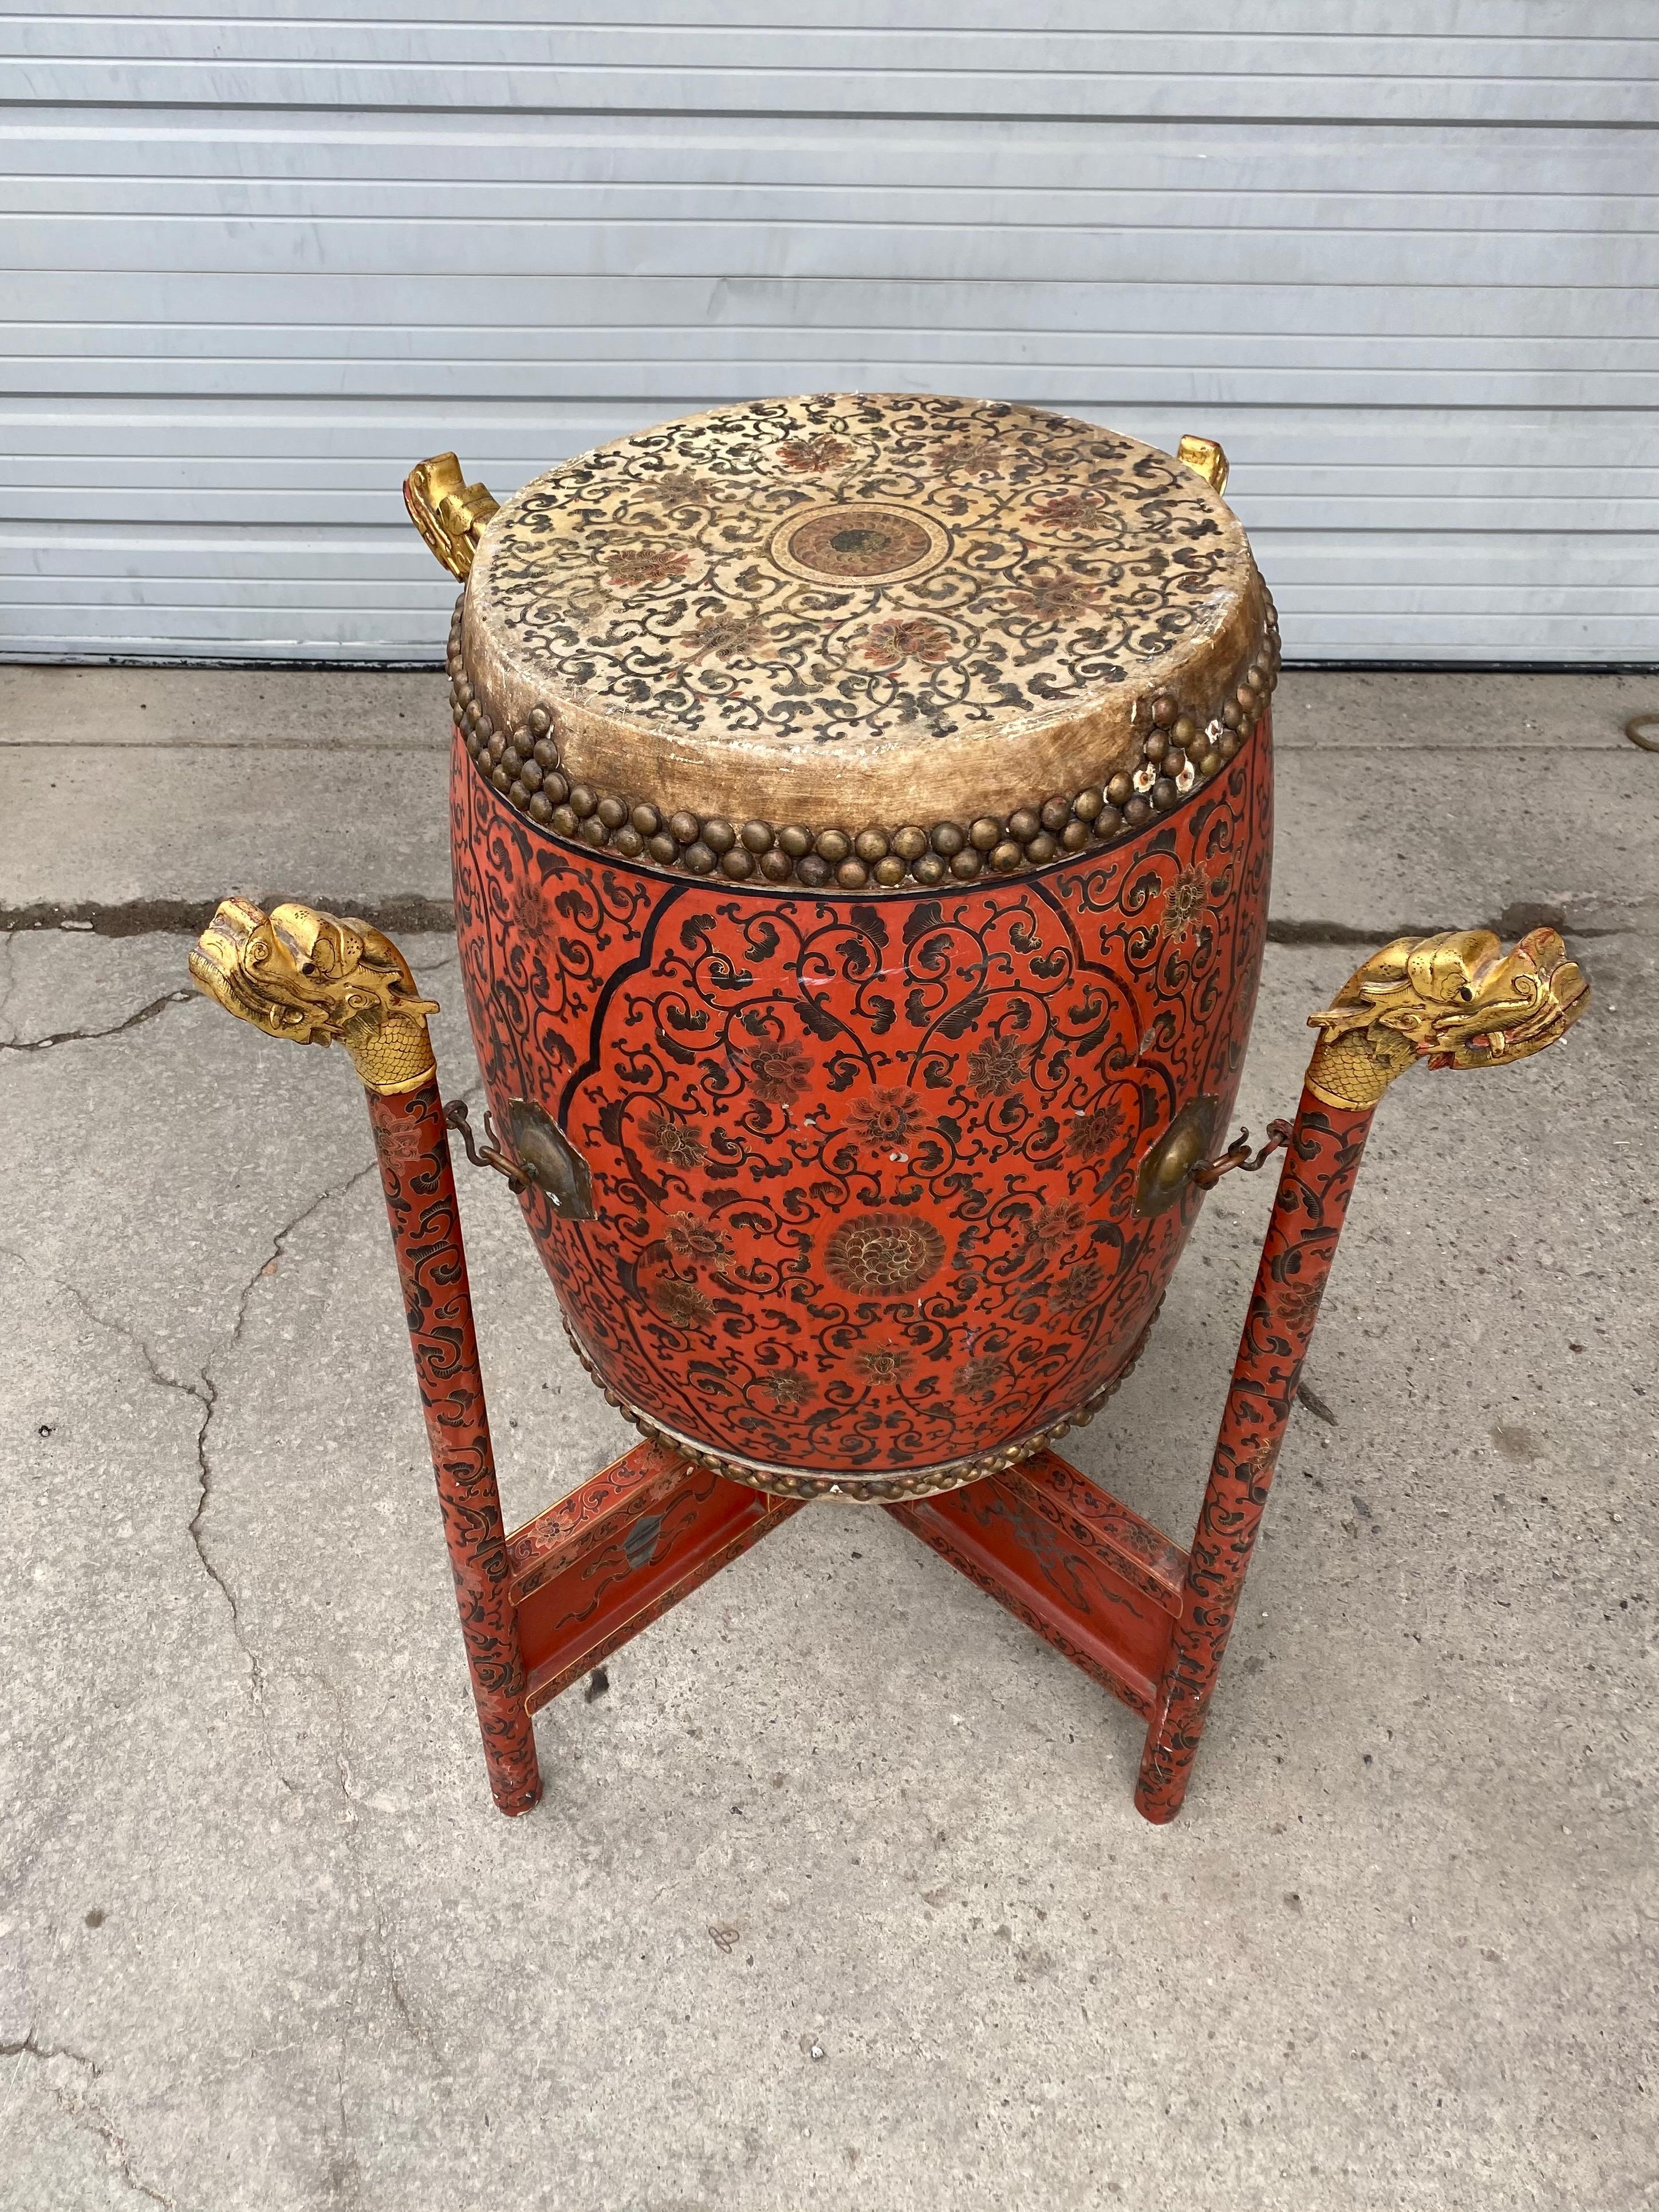 Large 19th century Qing Dynasty Chinese ceremonial lacquered drum, highly decorated, painted, gold gilded dragon head stand, hand decorated top and bottom animal skin, drum measures 22